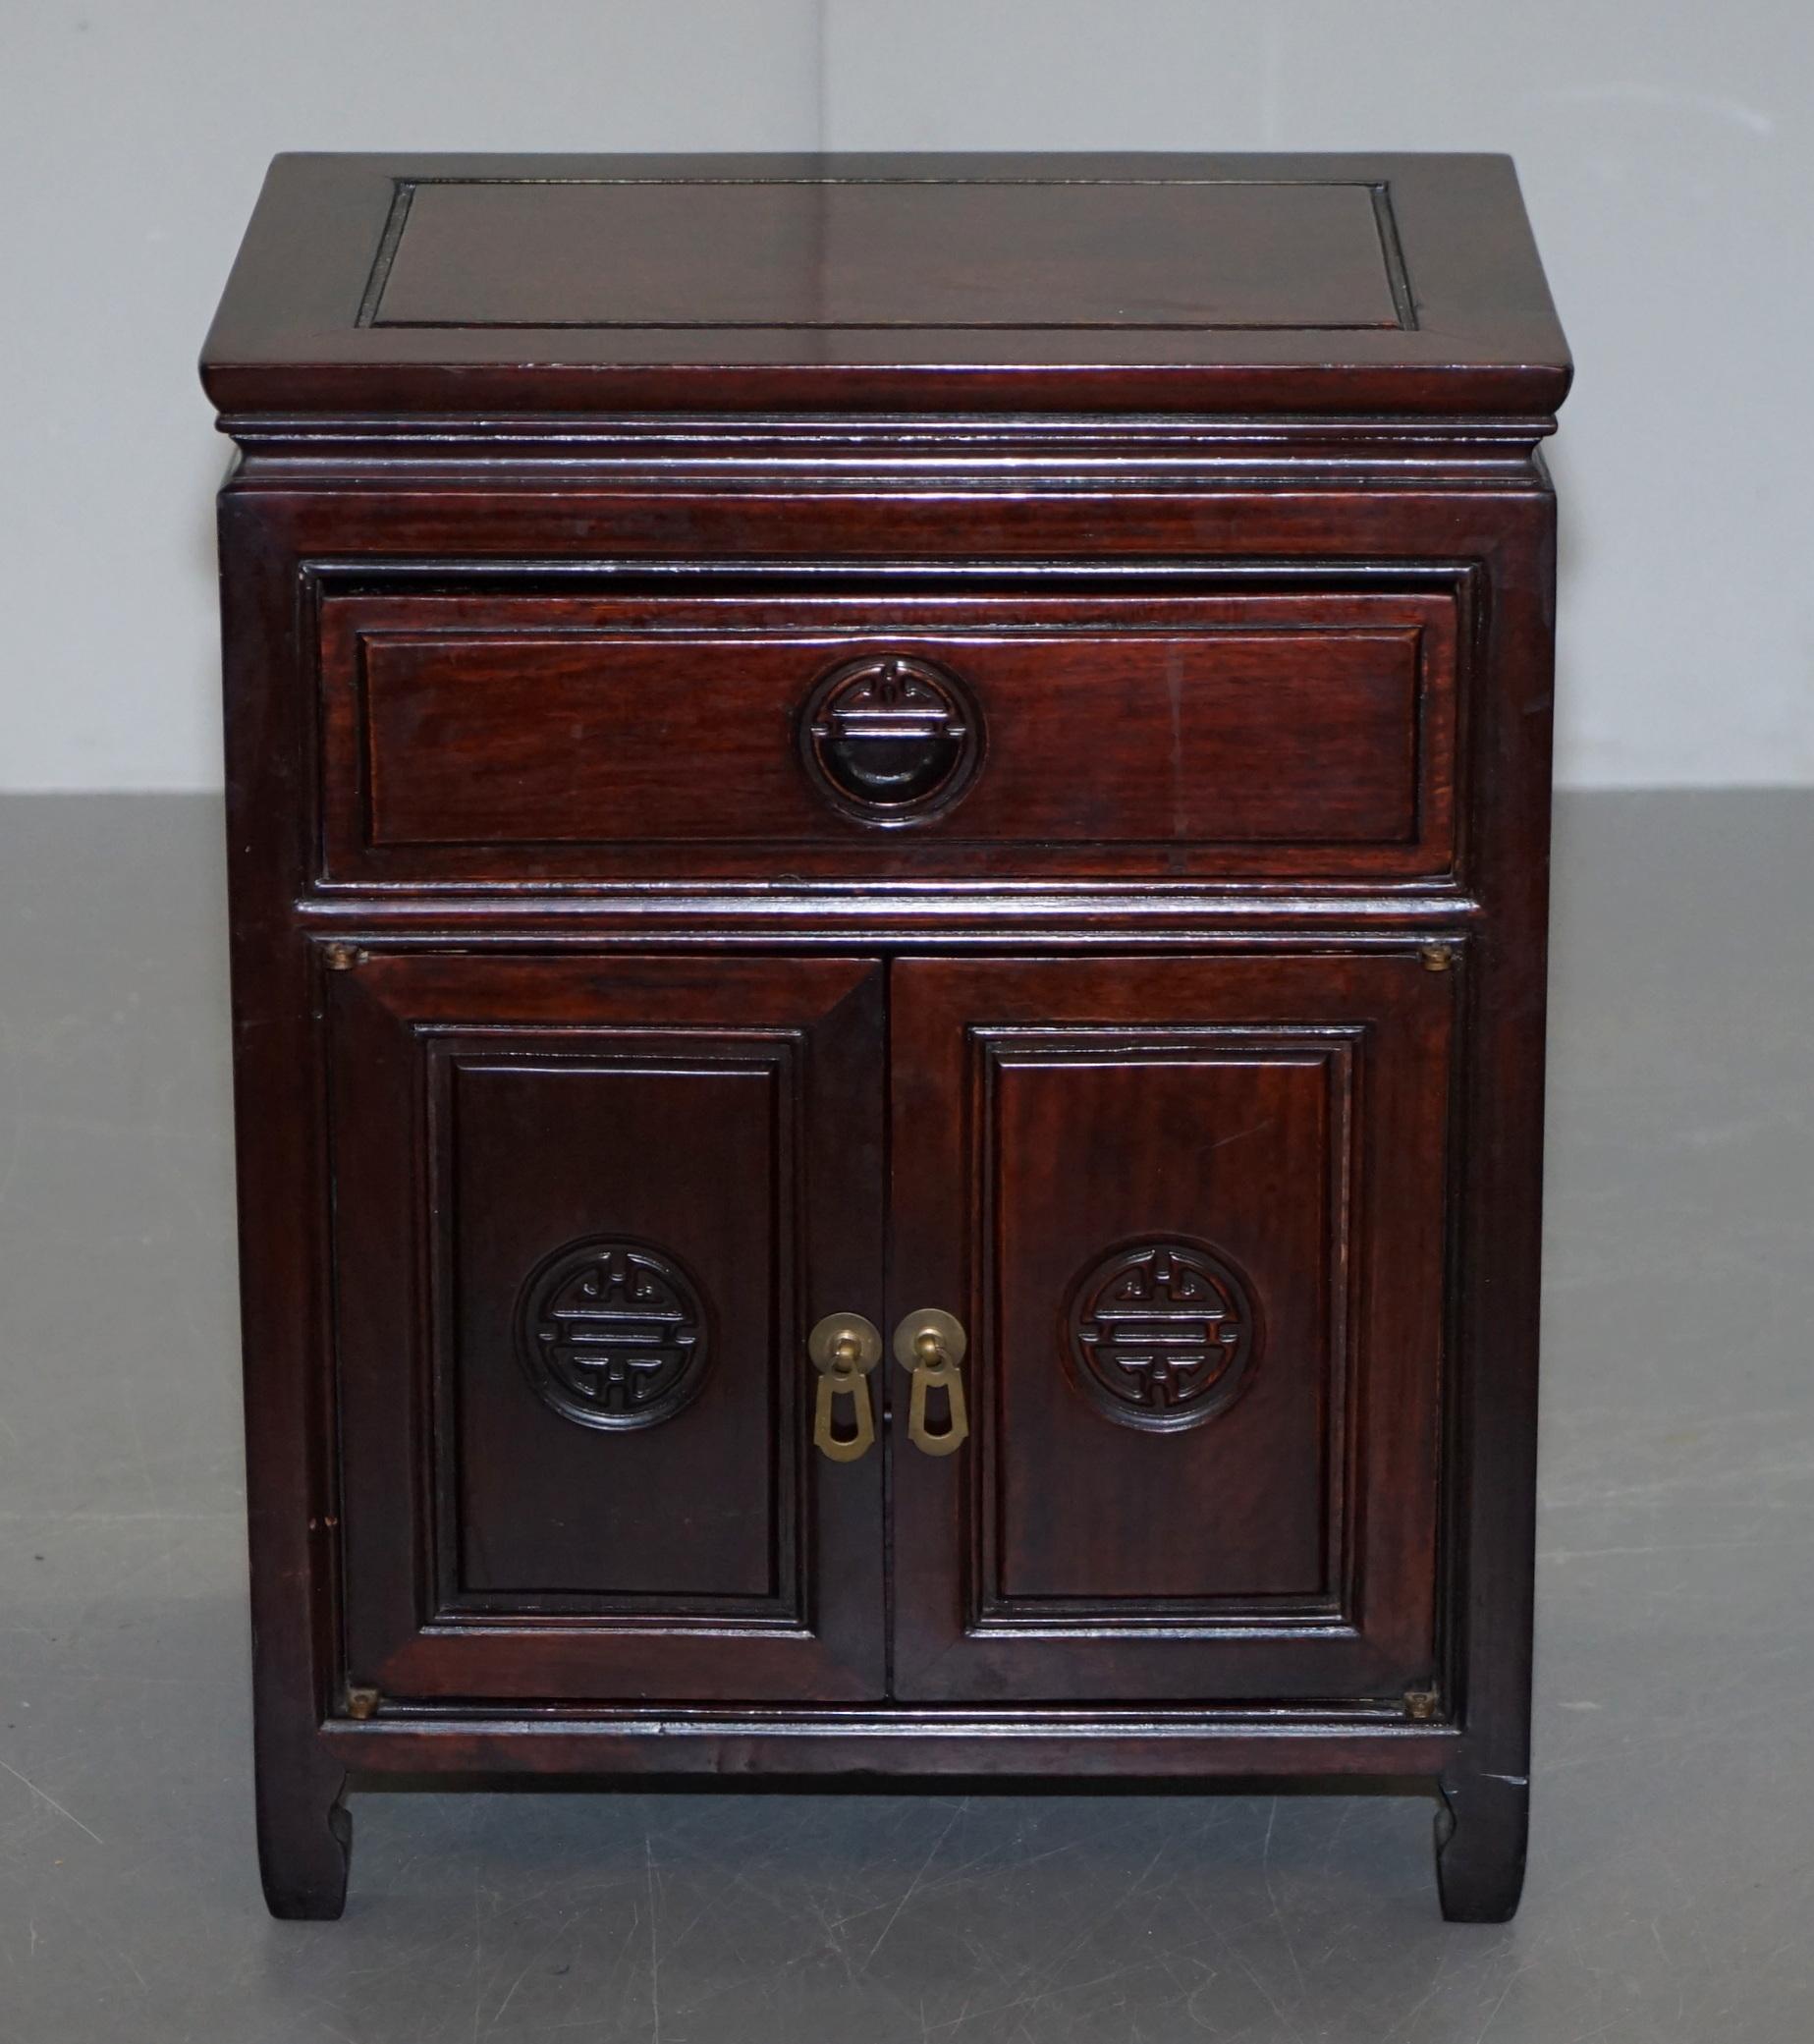 We are delighted to offer for sale this lovely Chinese side table sized cupboard with single drawer made in red teak

A good looking and well made piece which is very utilitarian, it cane be used as a lamp or side table in a sitting room setting